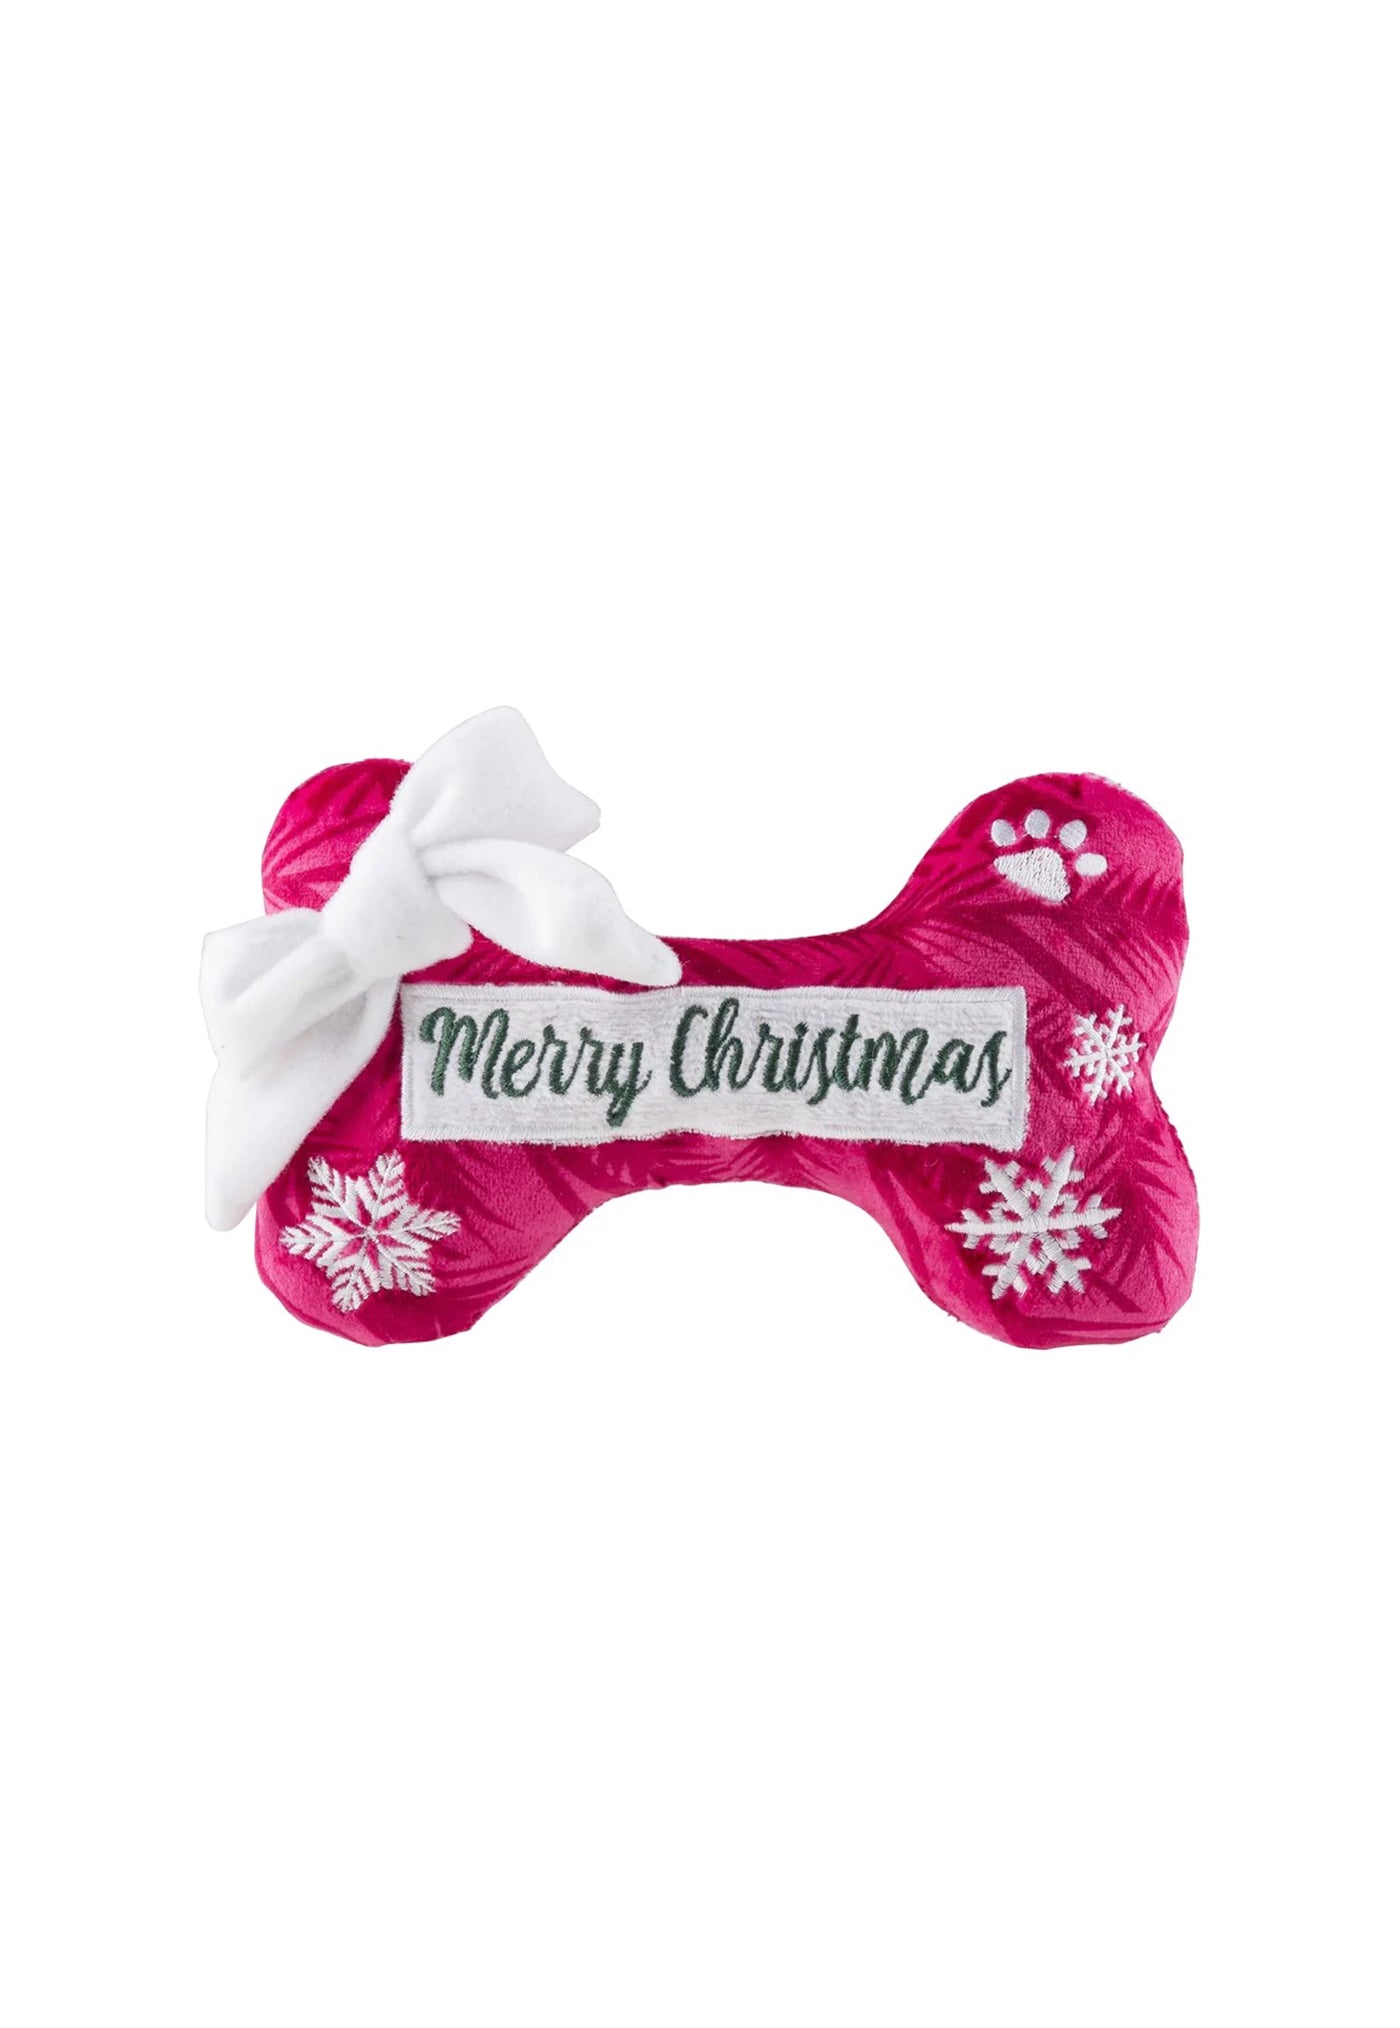 Puppermint Bone - Merry Christmas sold by Angel Divine